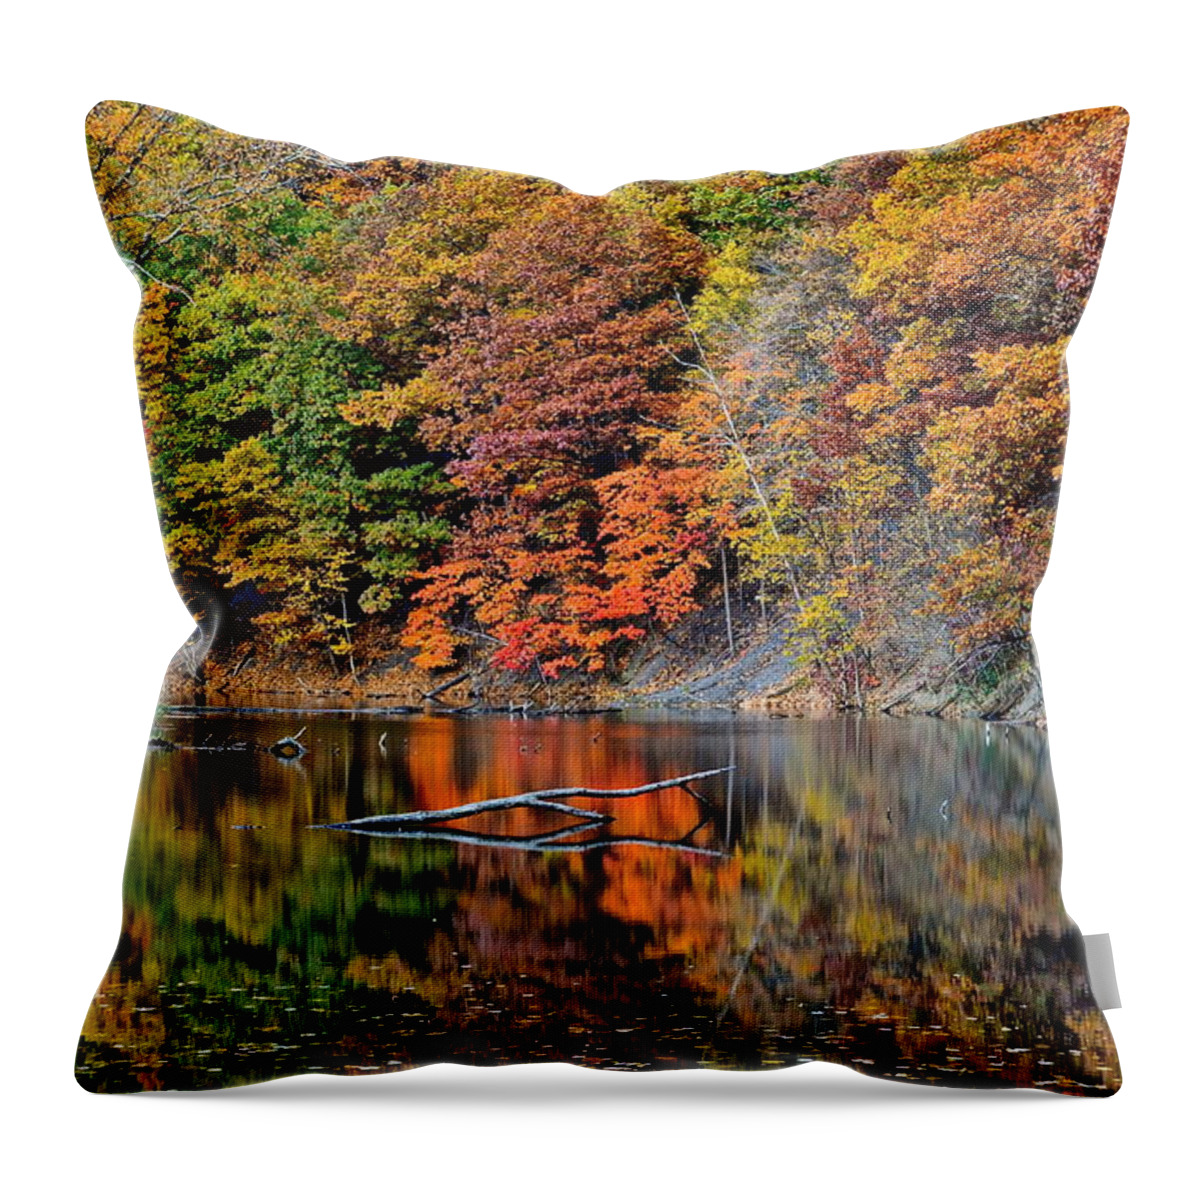 Autumn Throw Pillow featuring the photograph Autumn Colors Reflect by Frozen in Time Fine Art Photography